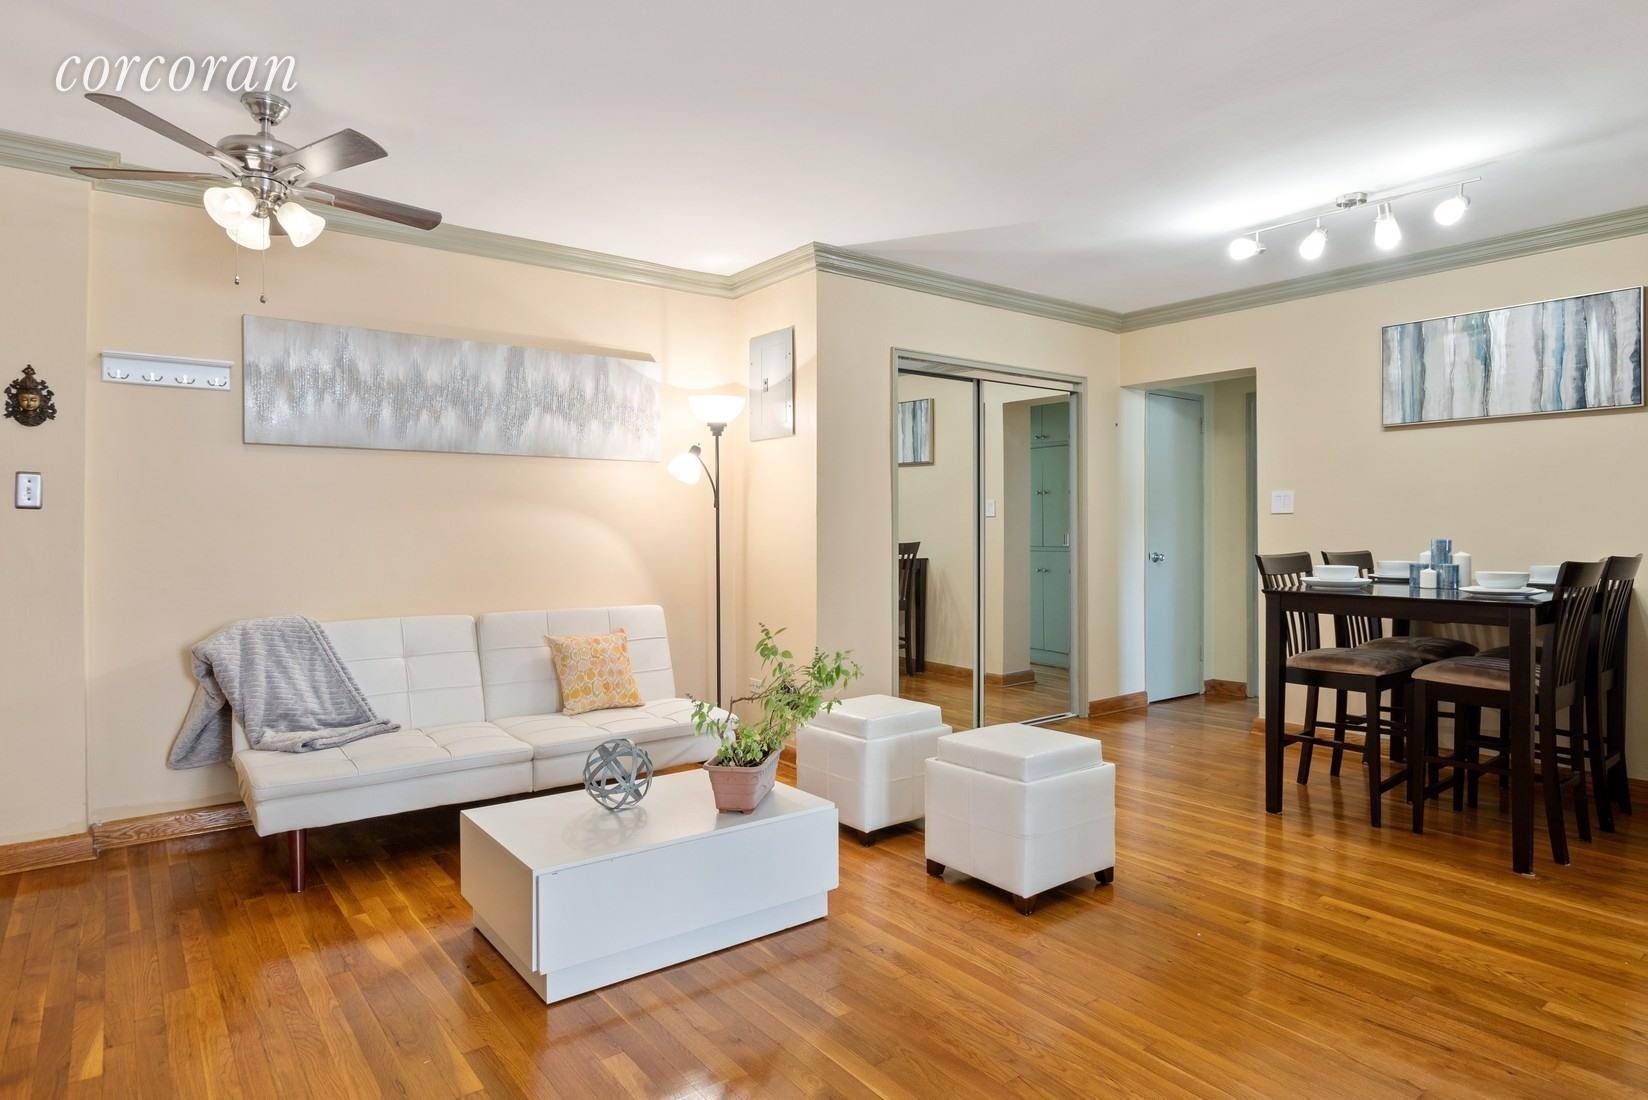 Welcome home to this high floor CONVERTED two bedroom unit in lovely Windsor Terrace.